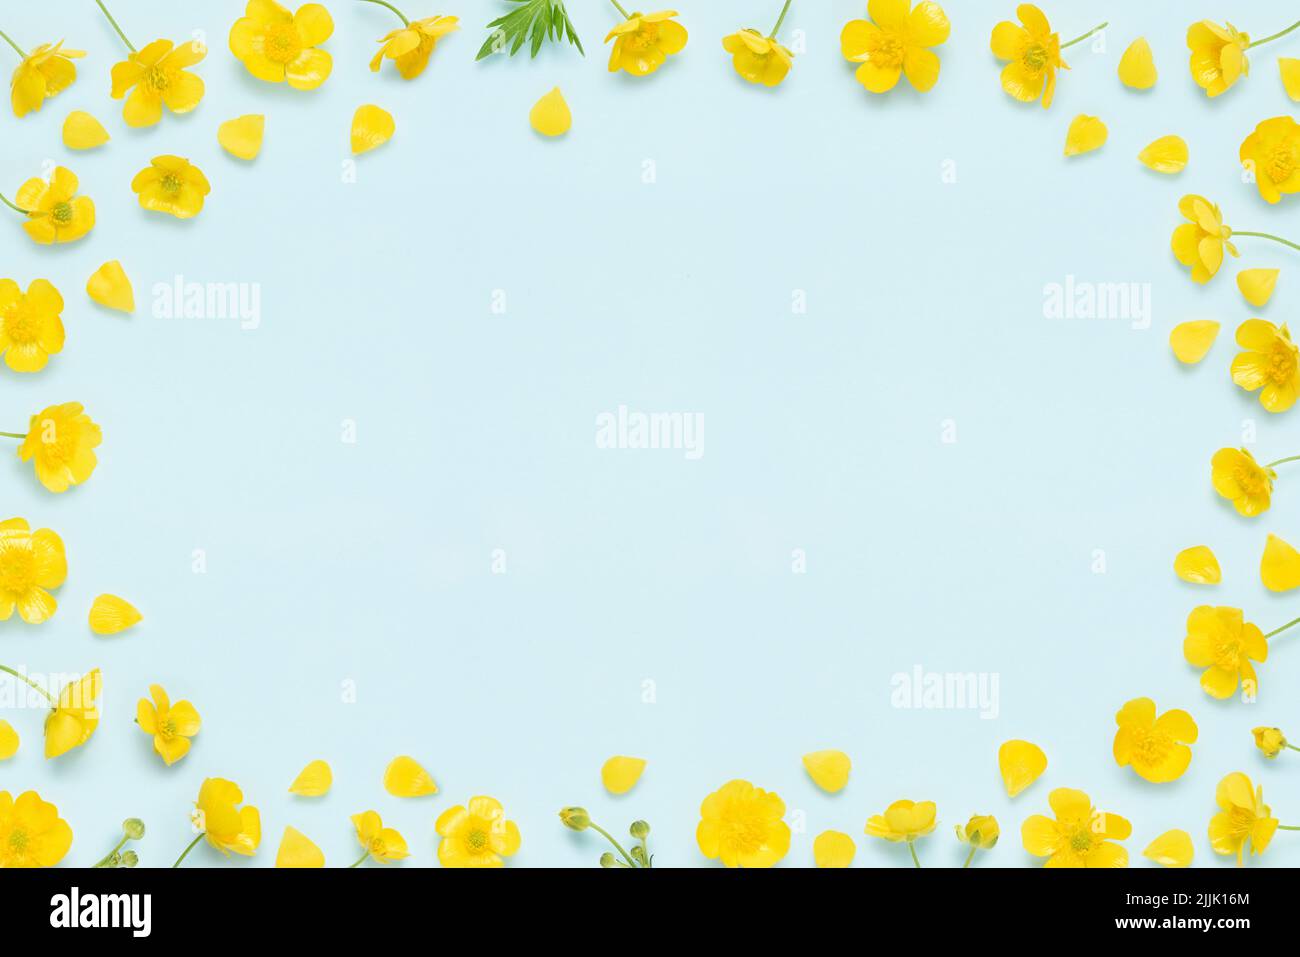 Floral frame of yellow blooming buttercup, common wild meadow flower, with buds, leaves and petals top view flat lay background Stock Photo